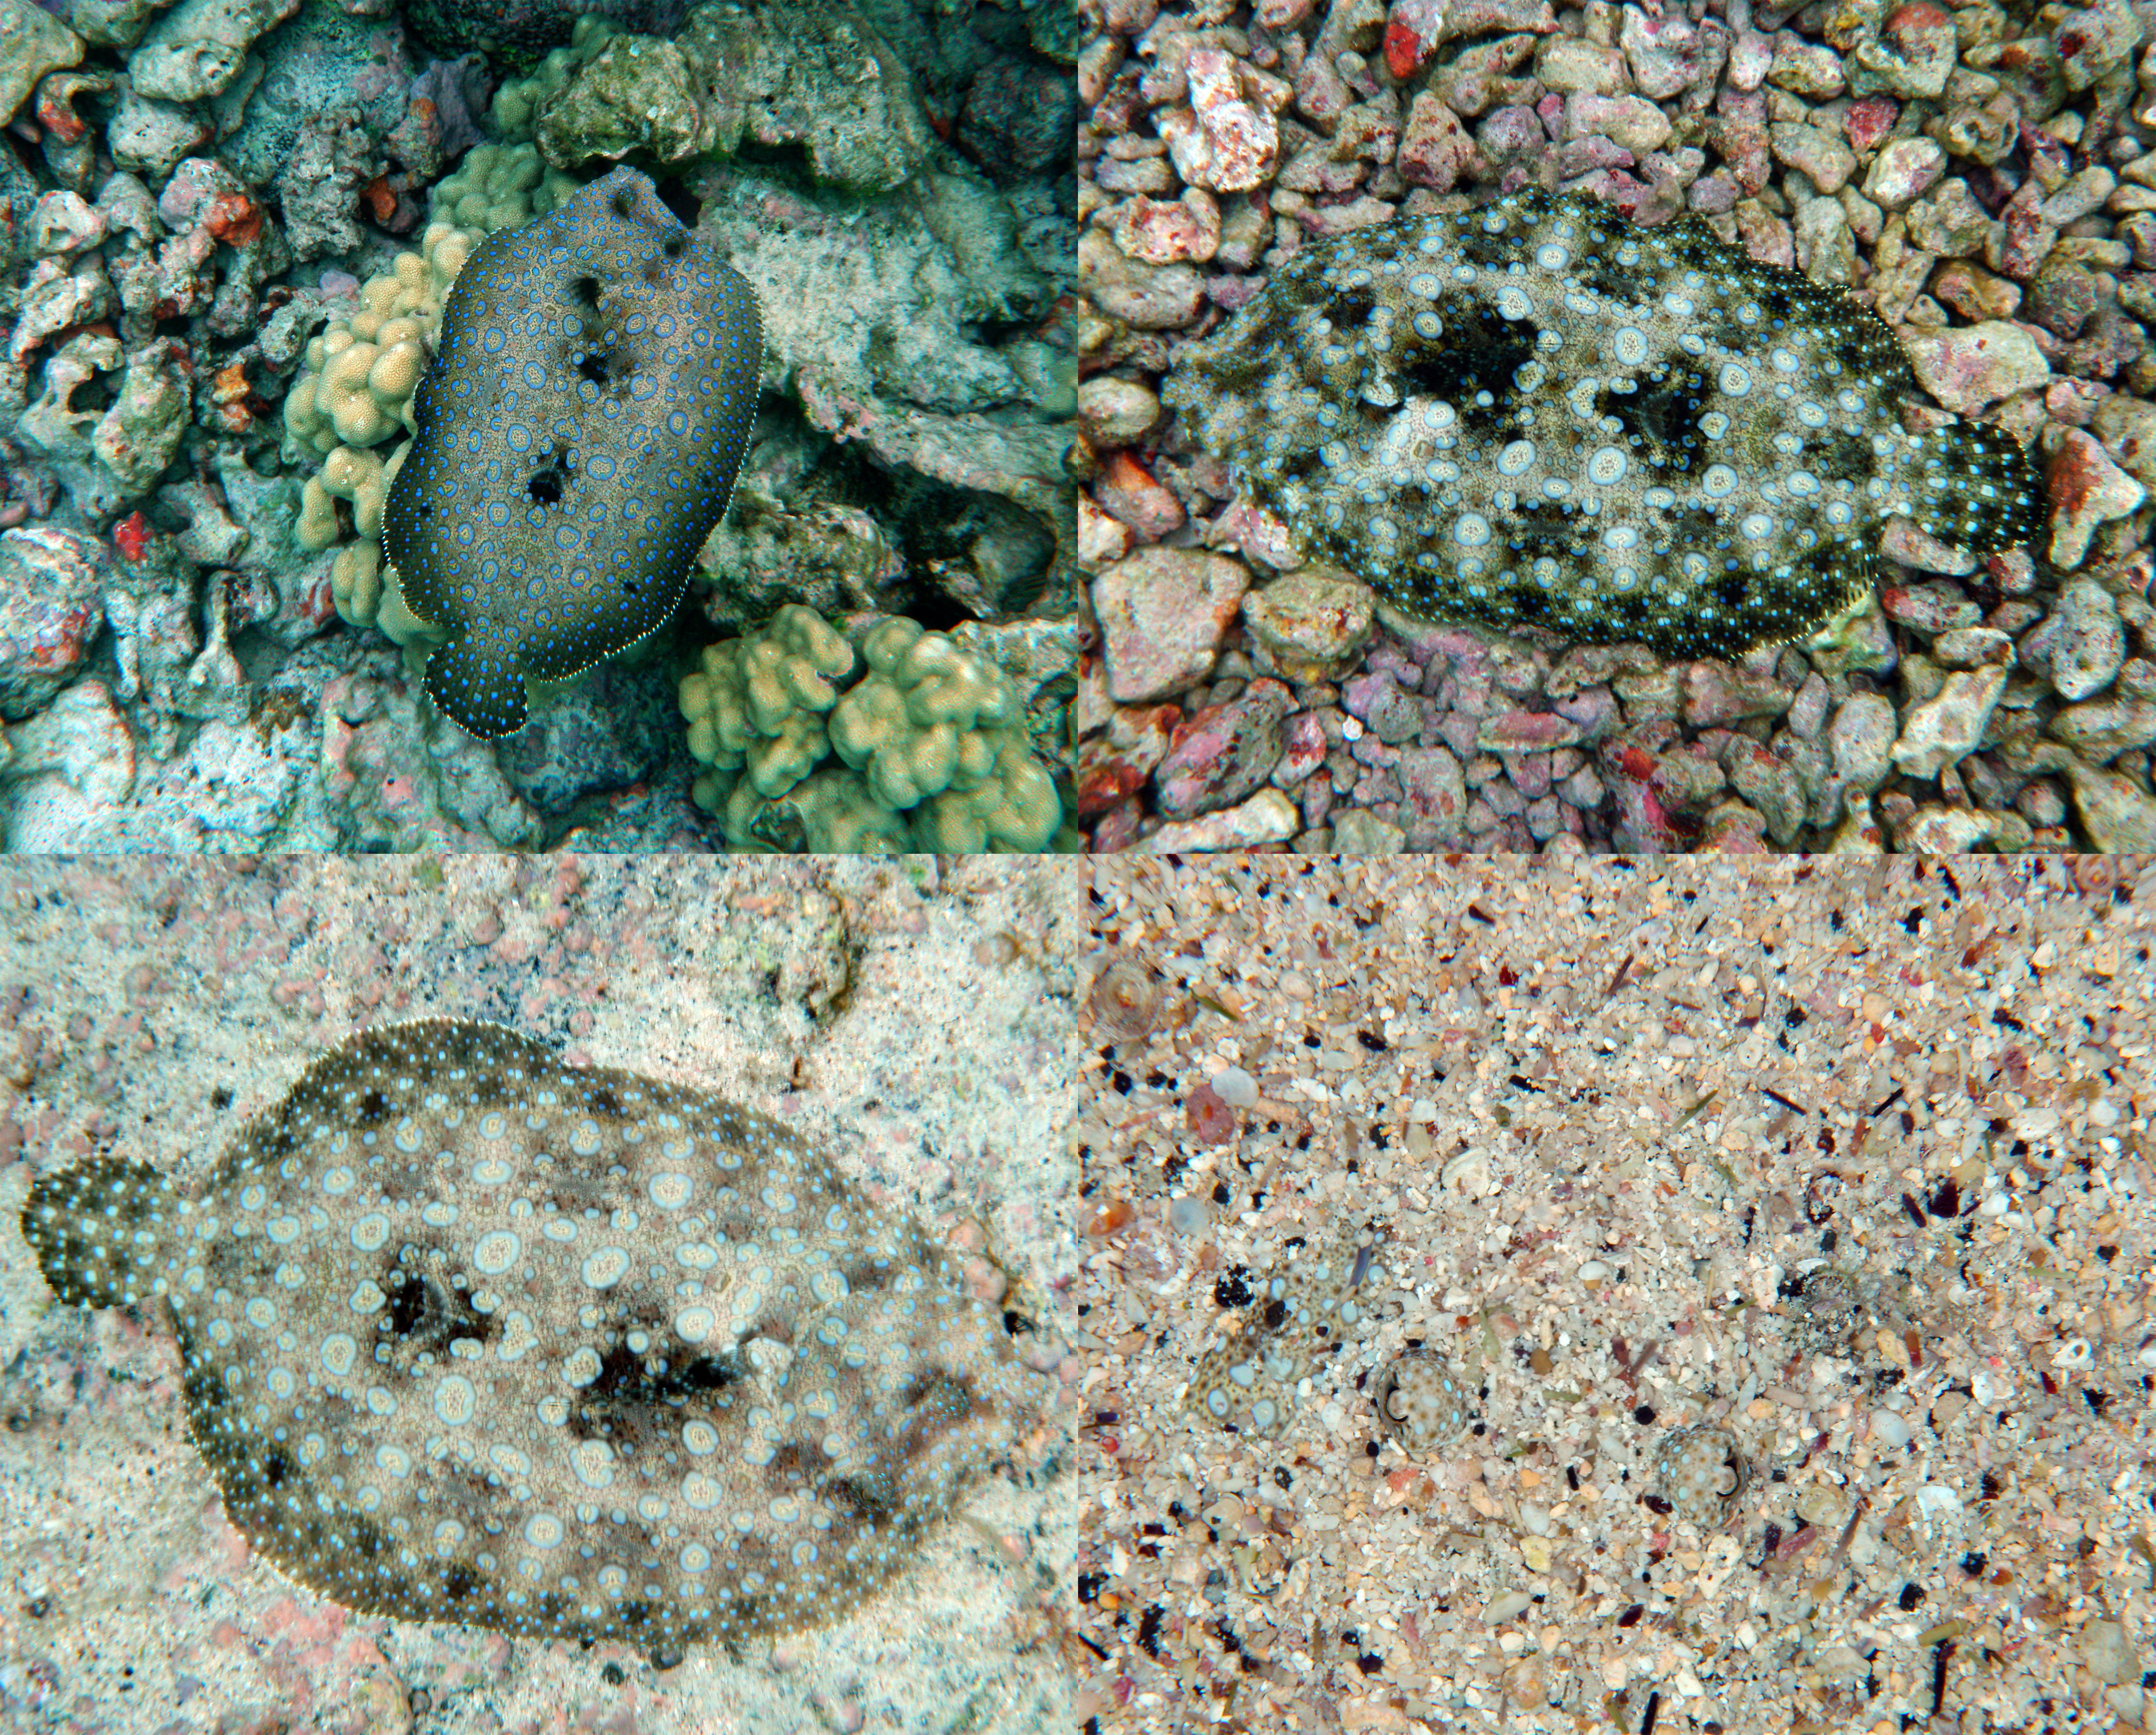 Flounder fish can camouflage themselves on a checkerboard.